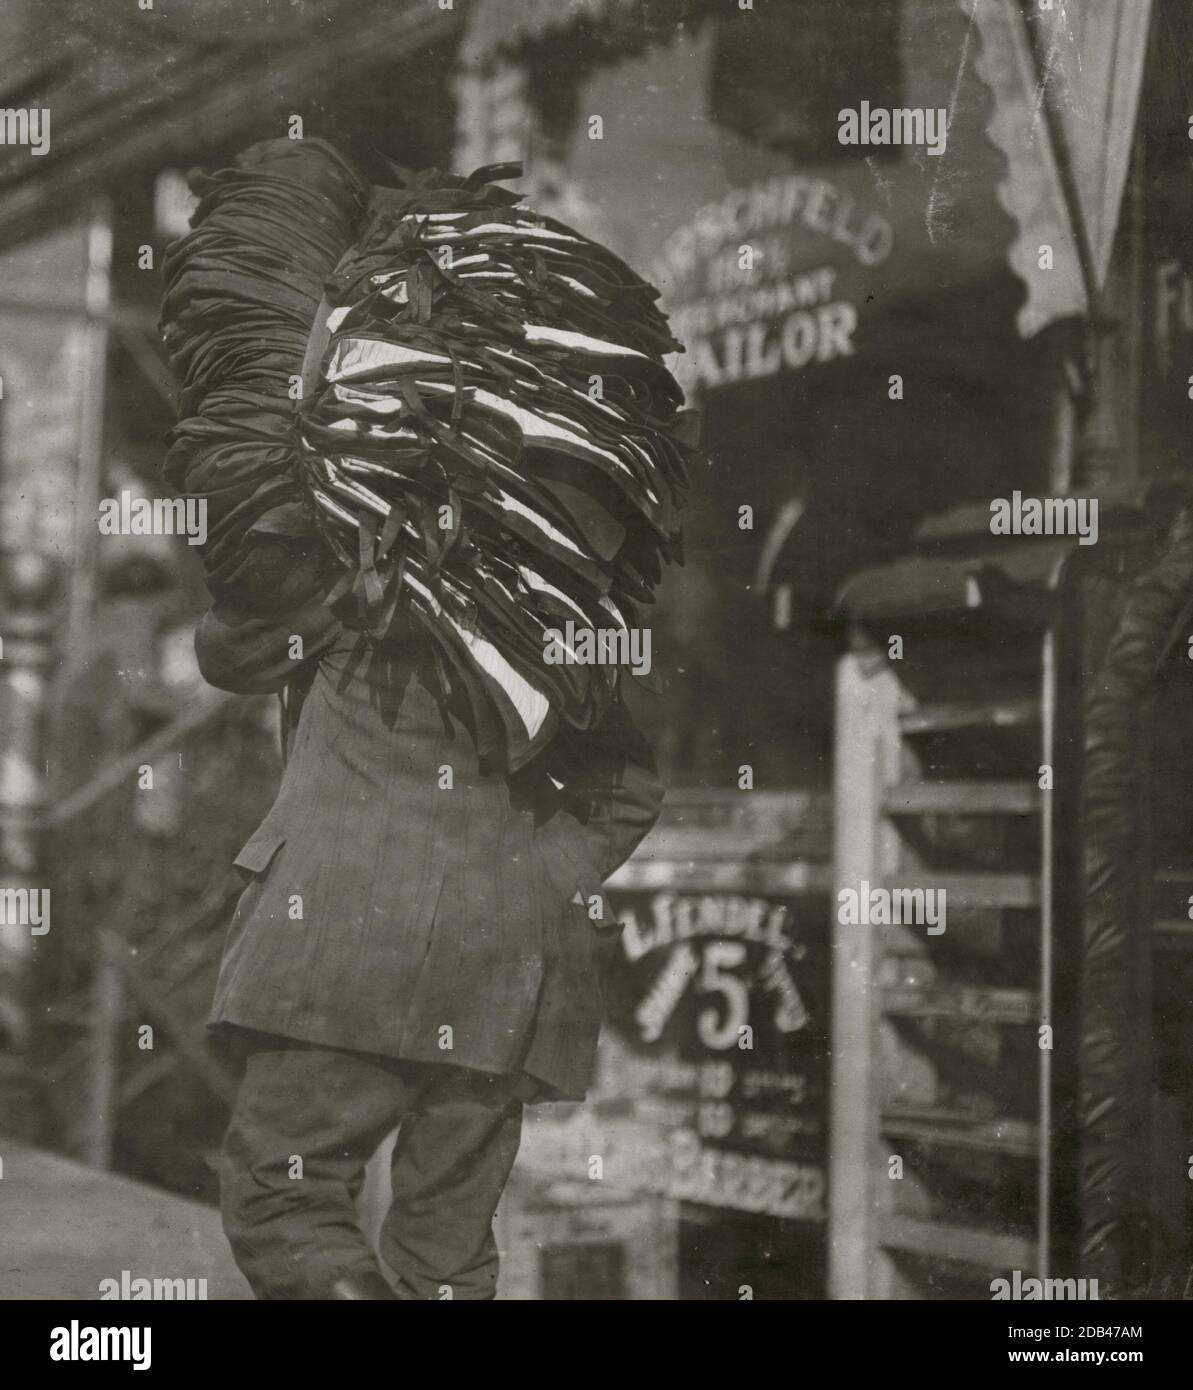 Man loaded down with heavy bundle of vests that he had been carrying for many blocks, stopping to rest, occasionally, when he would drop the bundle down onto whatever boxes or railings were available, even though they were dirty. Stock Photo